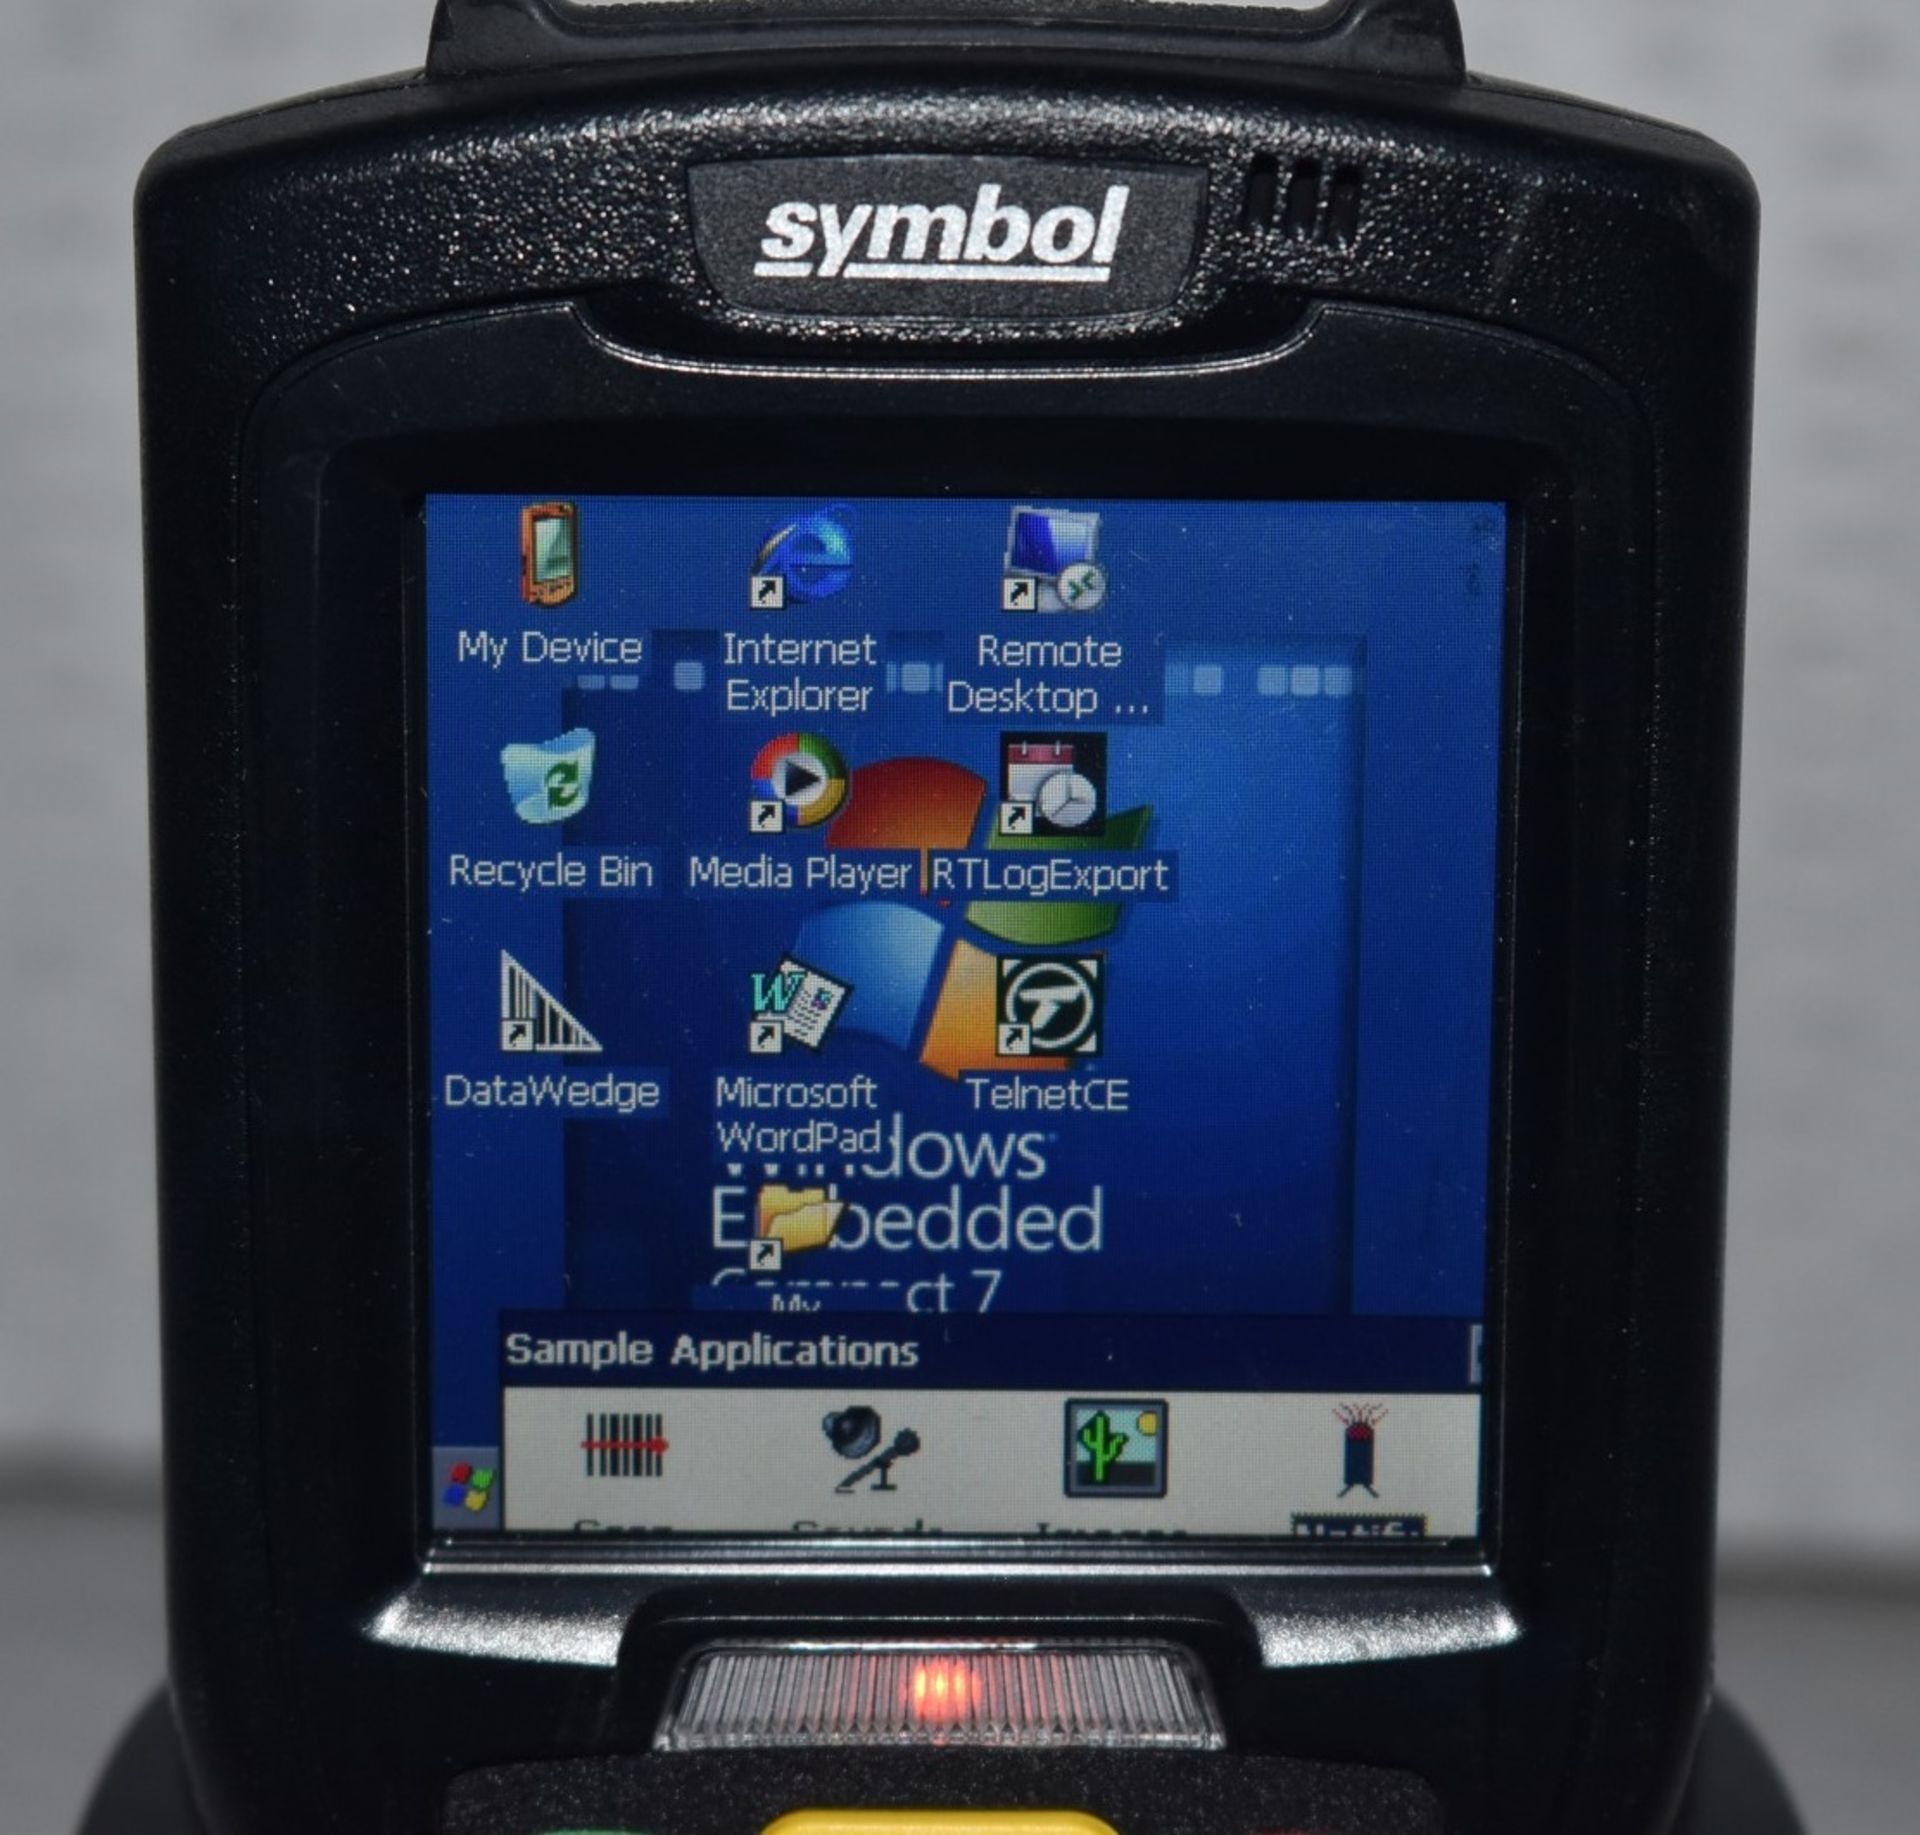 1 x Symbol MC3200 38 Key Laser Scanner With Docking Station - Features Windows Compact OS, - Image 8 of 10